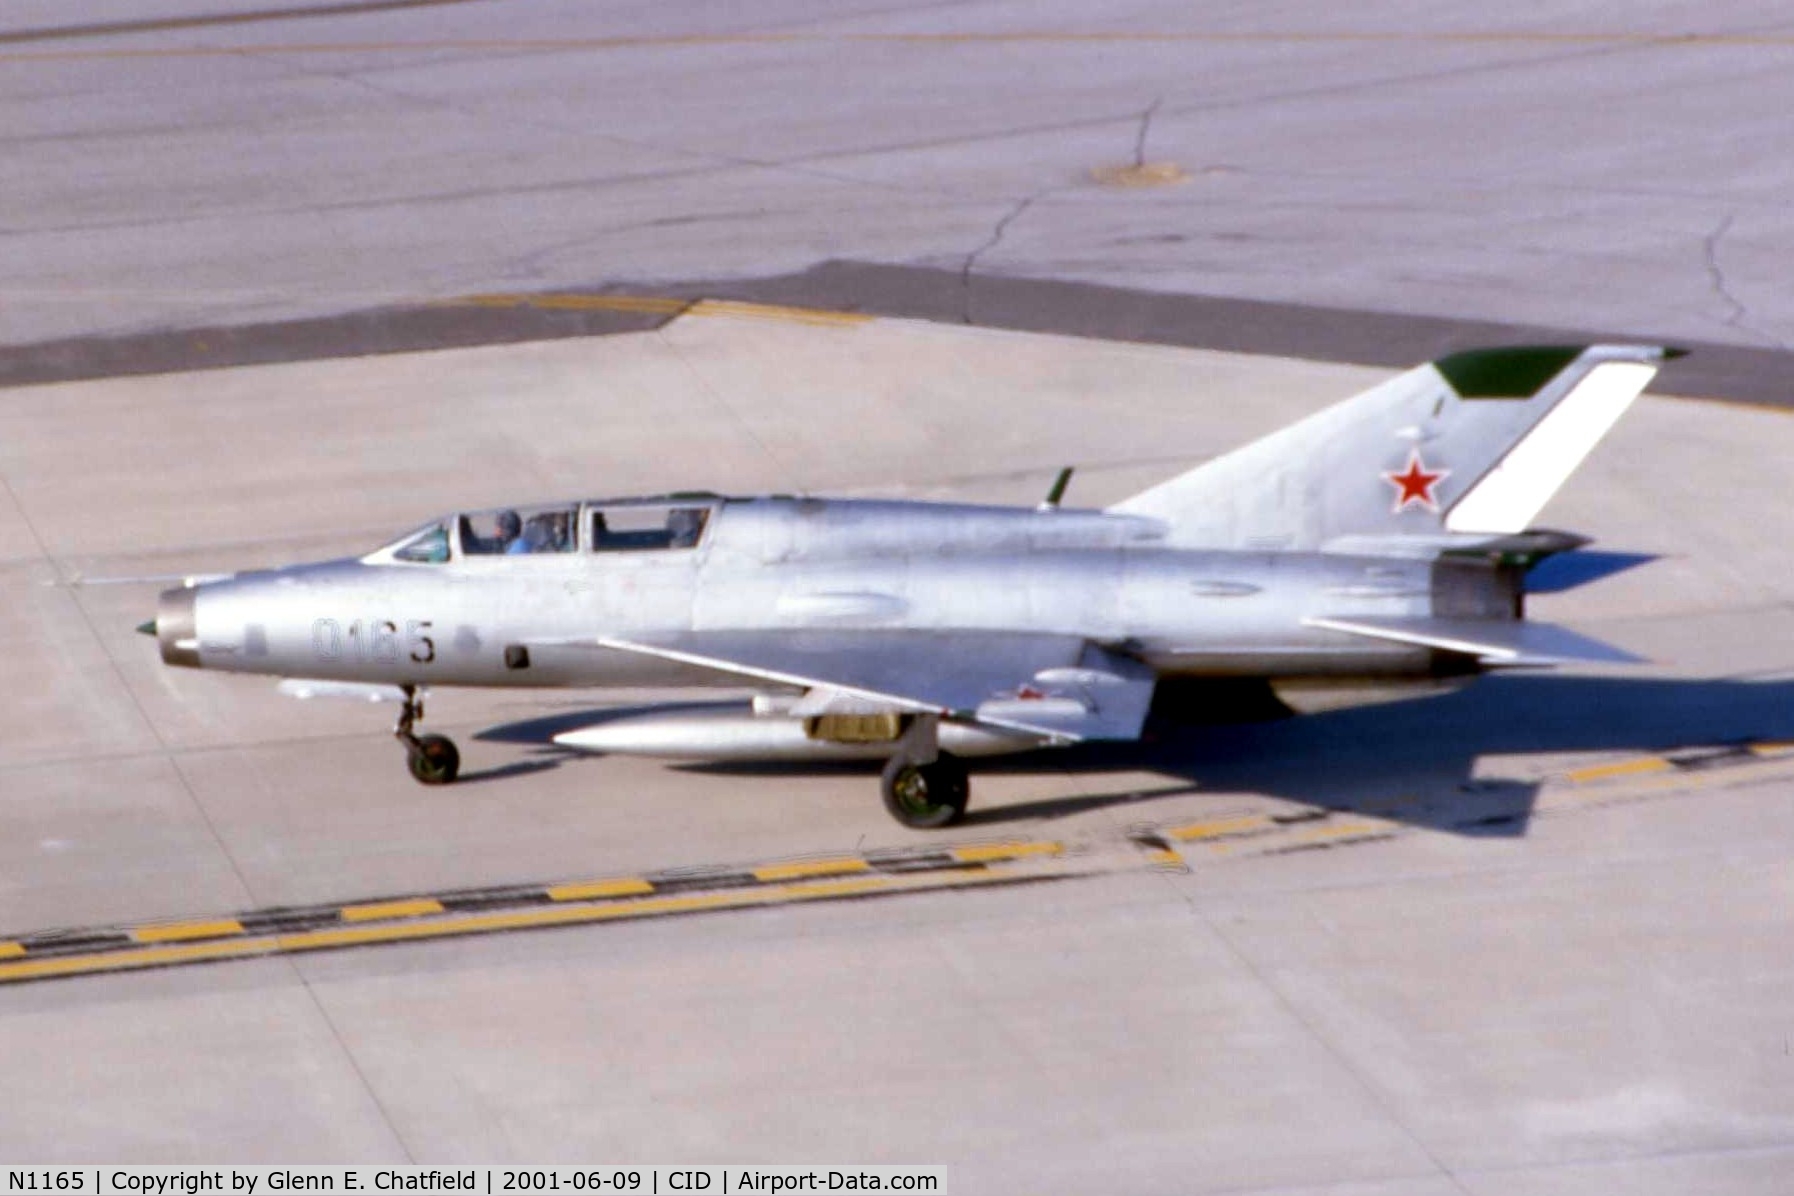 N1165, Mikoyan-Gurevich MIG-21UM C/N 01695165, Taxiing out to Runway 27 for departure